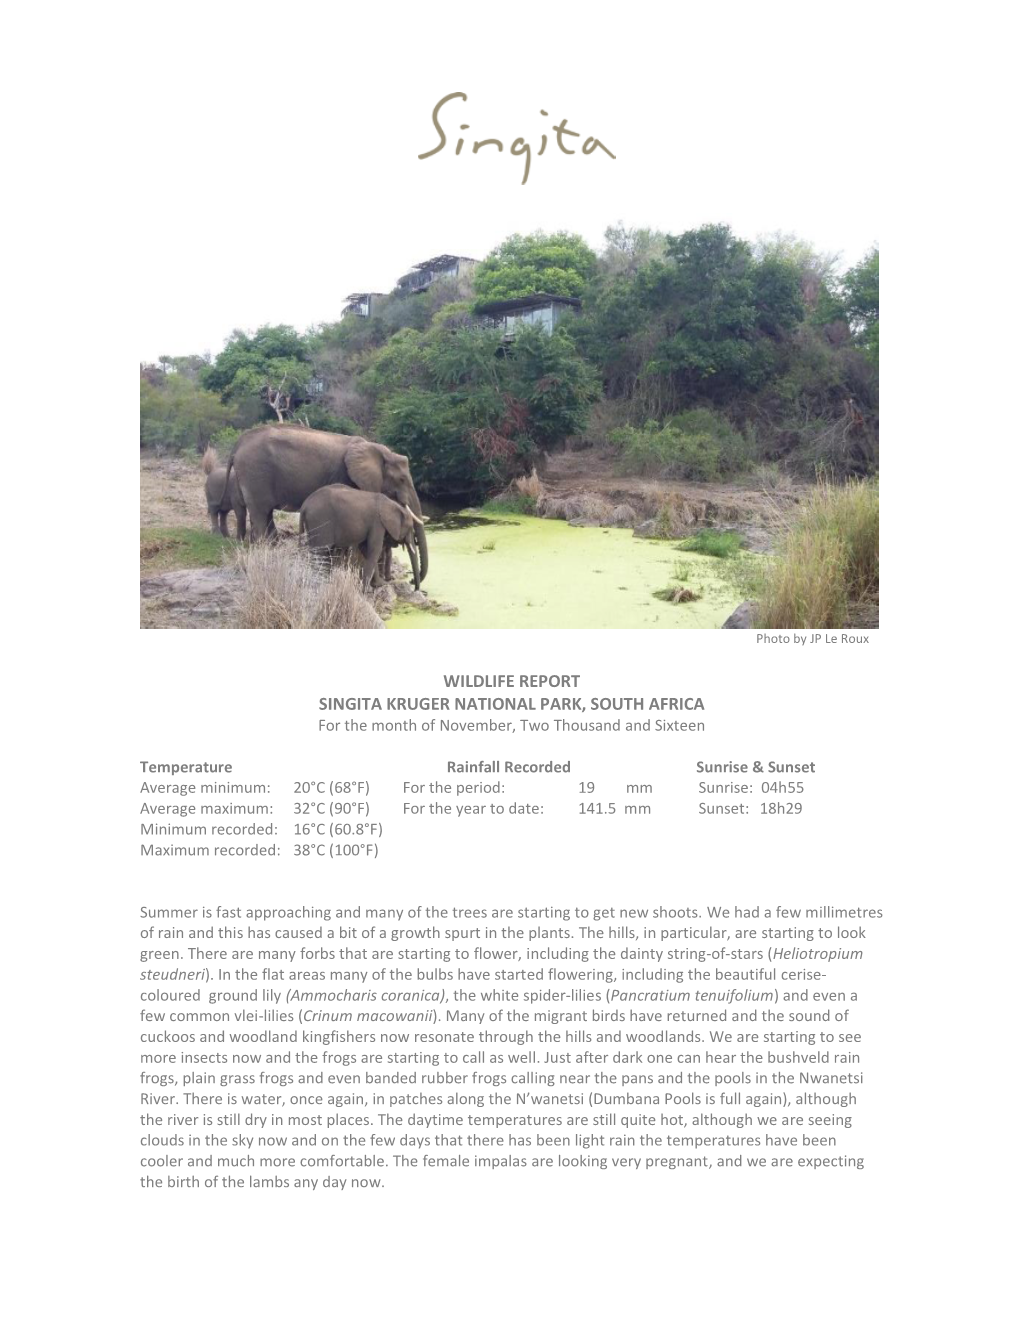 WILDLIFE REPORT SINGITA KRUGER NATIONAL PARK, SOUTH AFRICA for the Month of November, Two Thousand and Sixteen